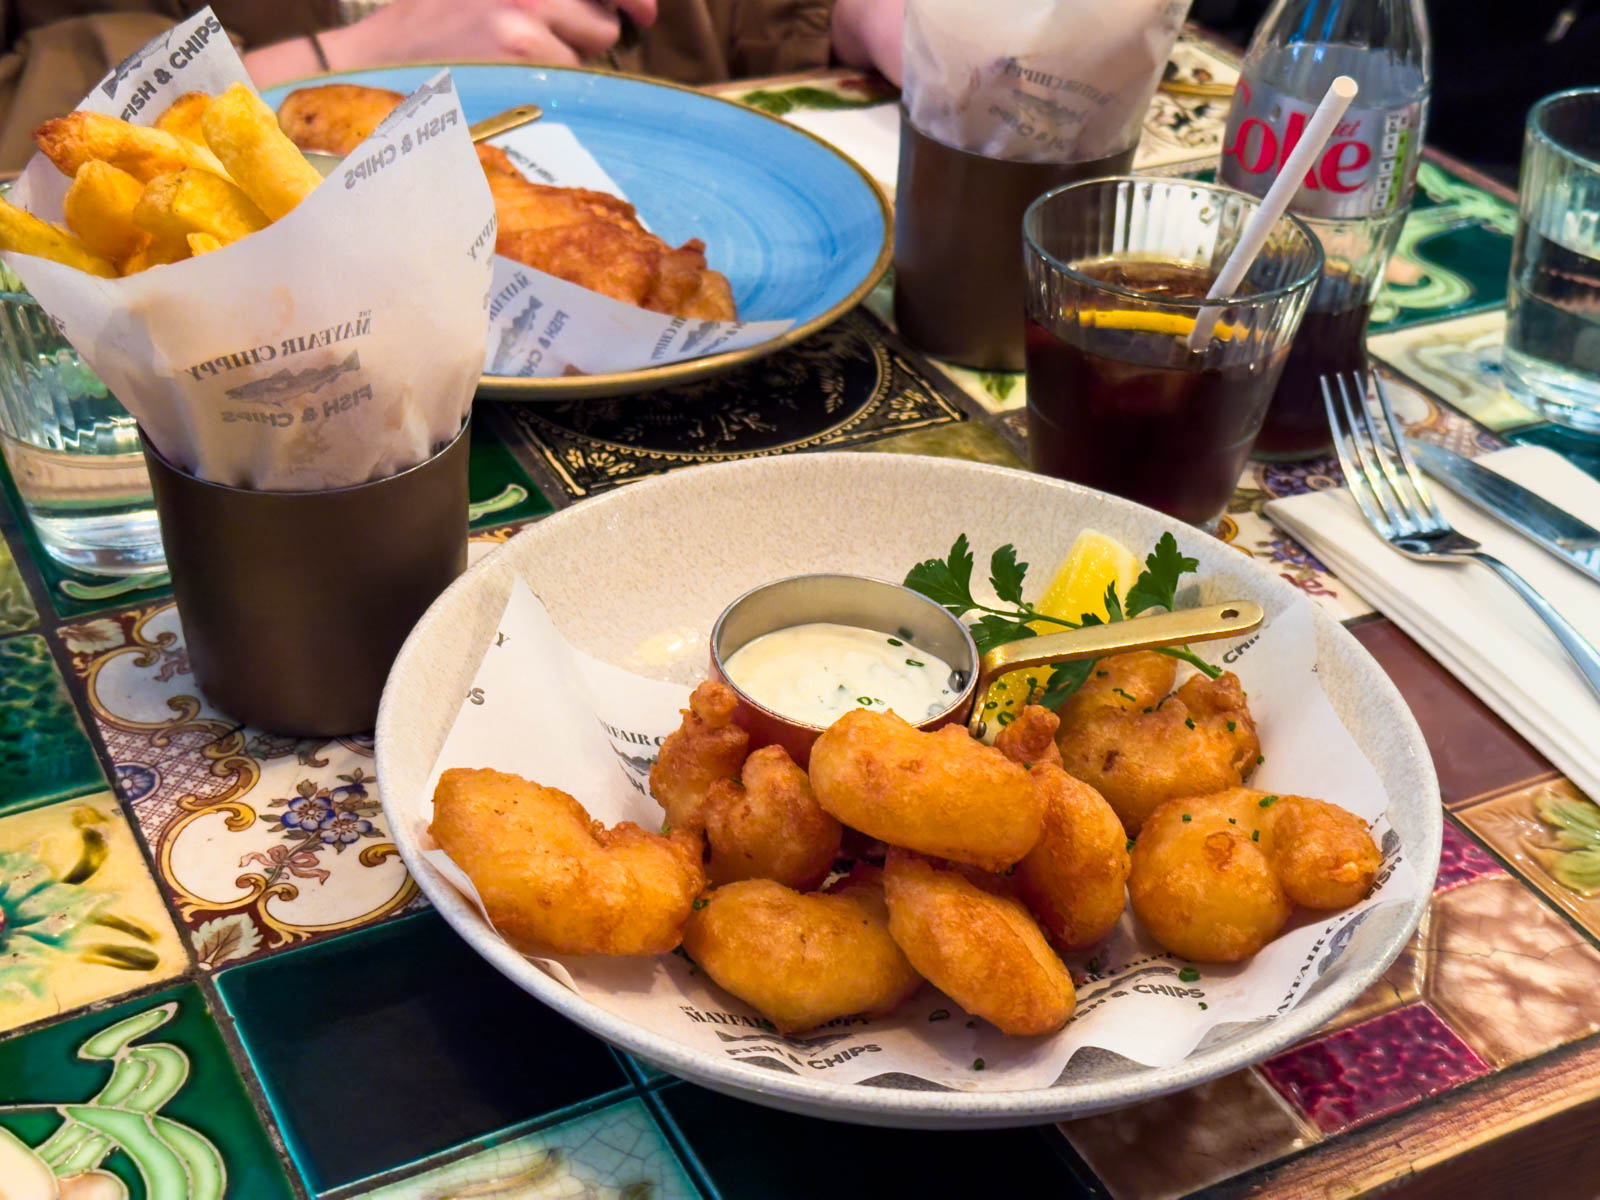 A plate of fried and battered prawns with tartar sauce.